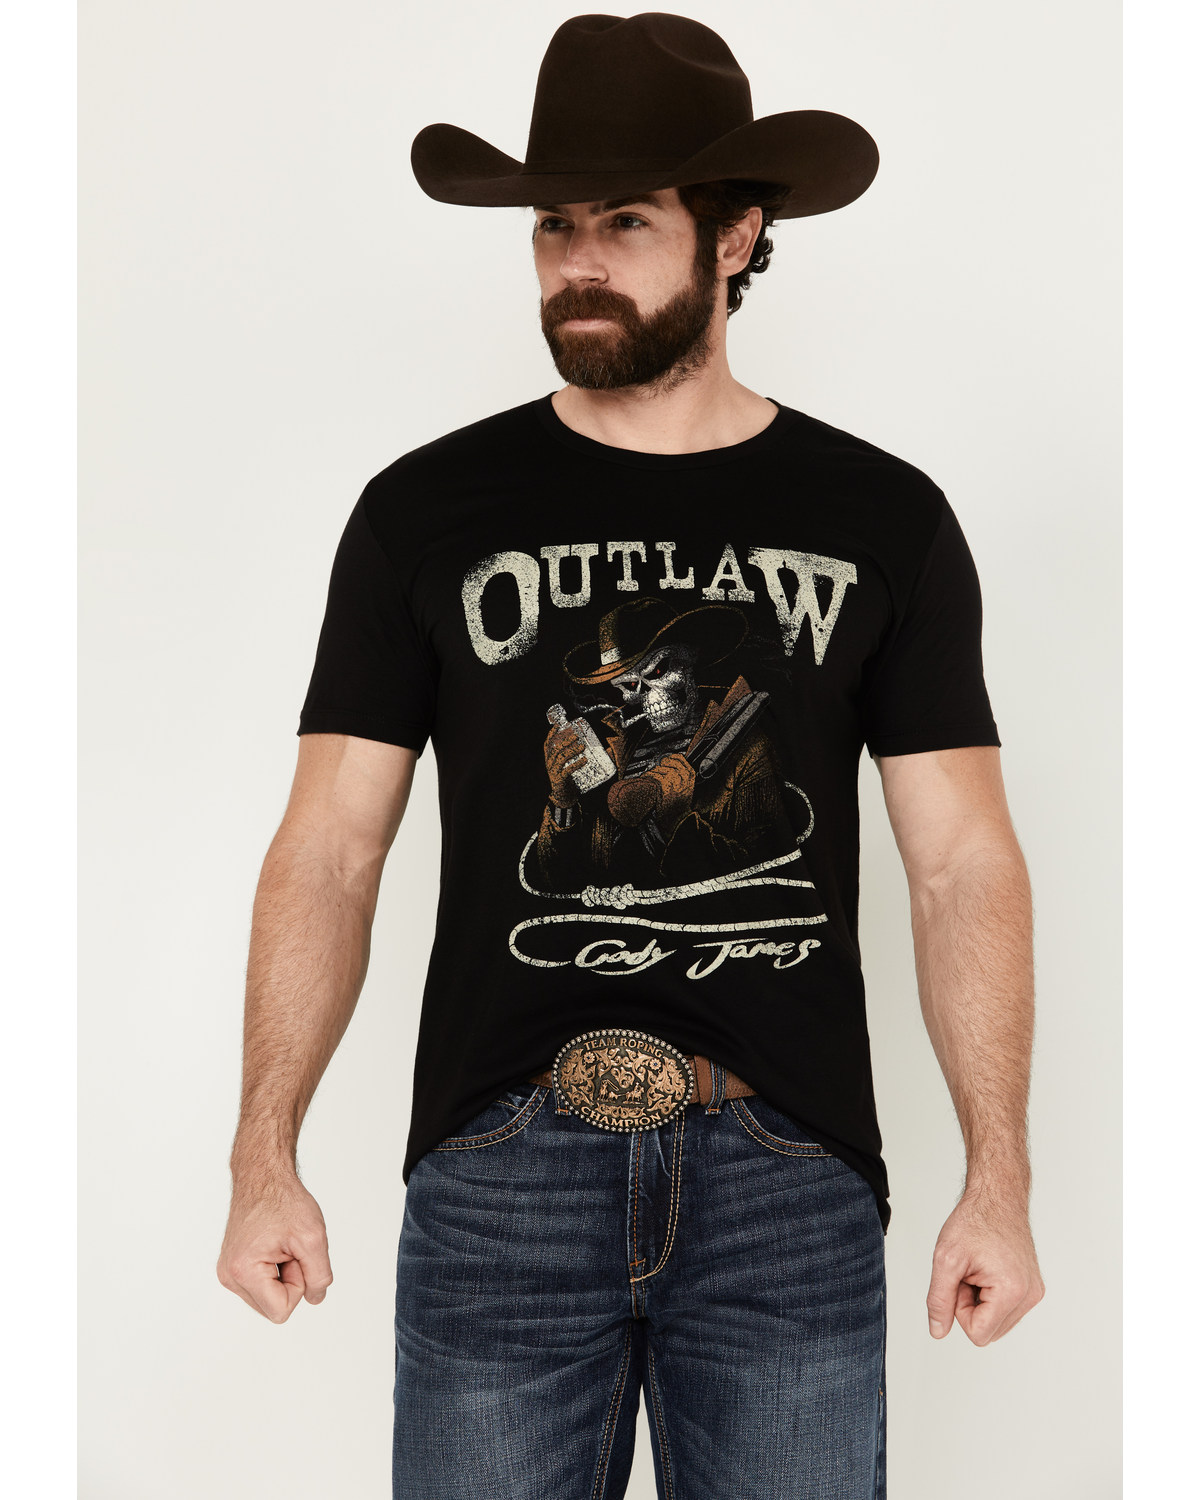 Cody James Men's Outlaw Short Sleeve Graphic T-Shirt